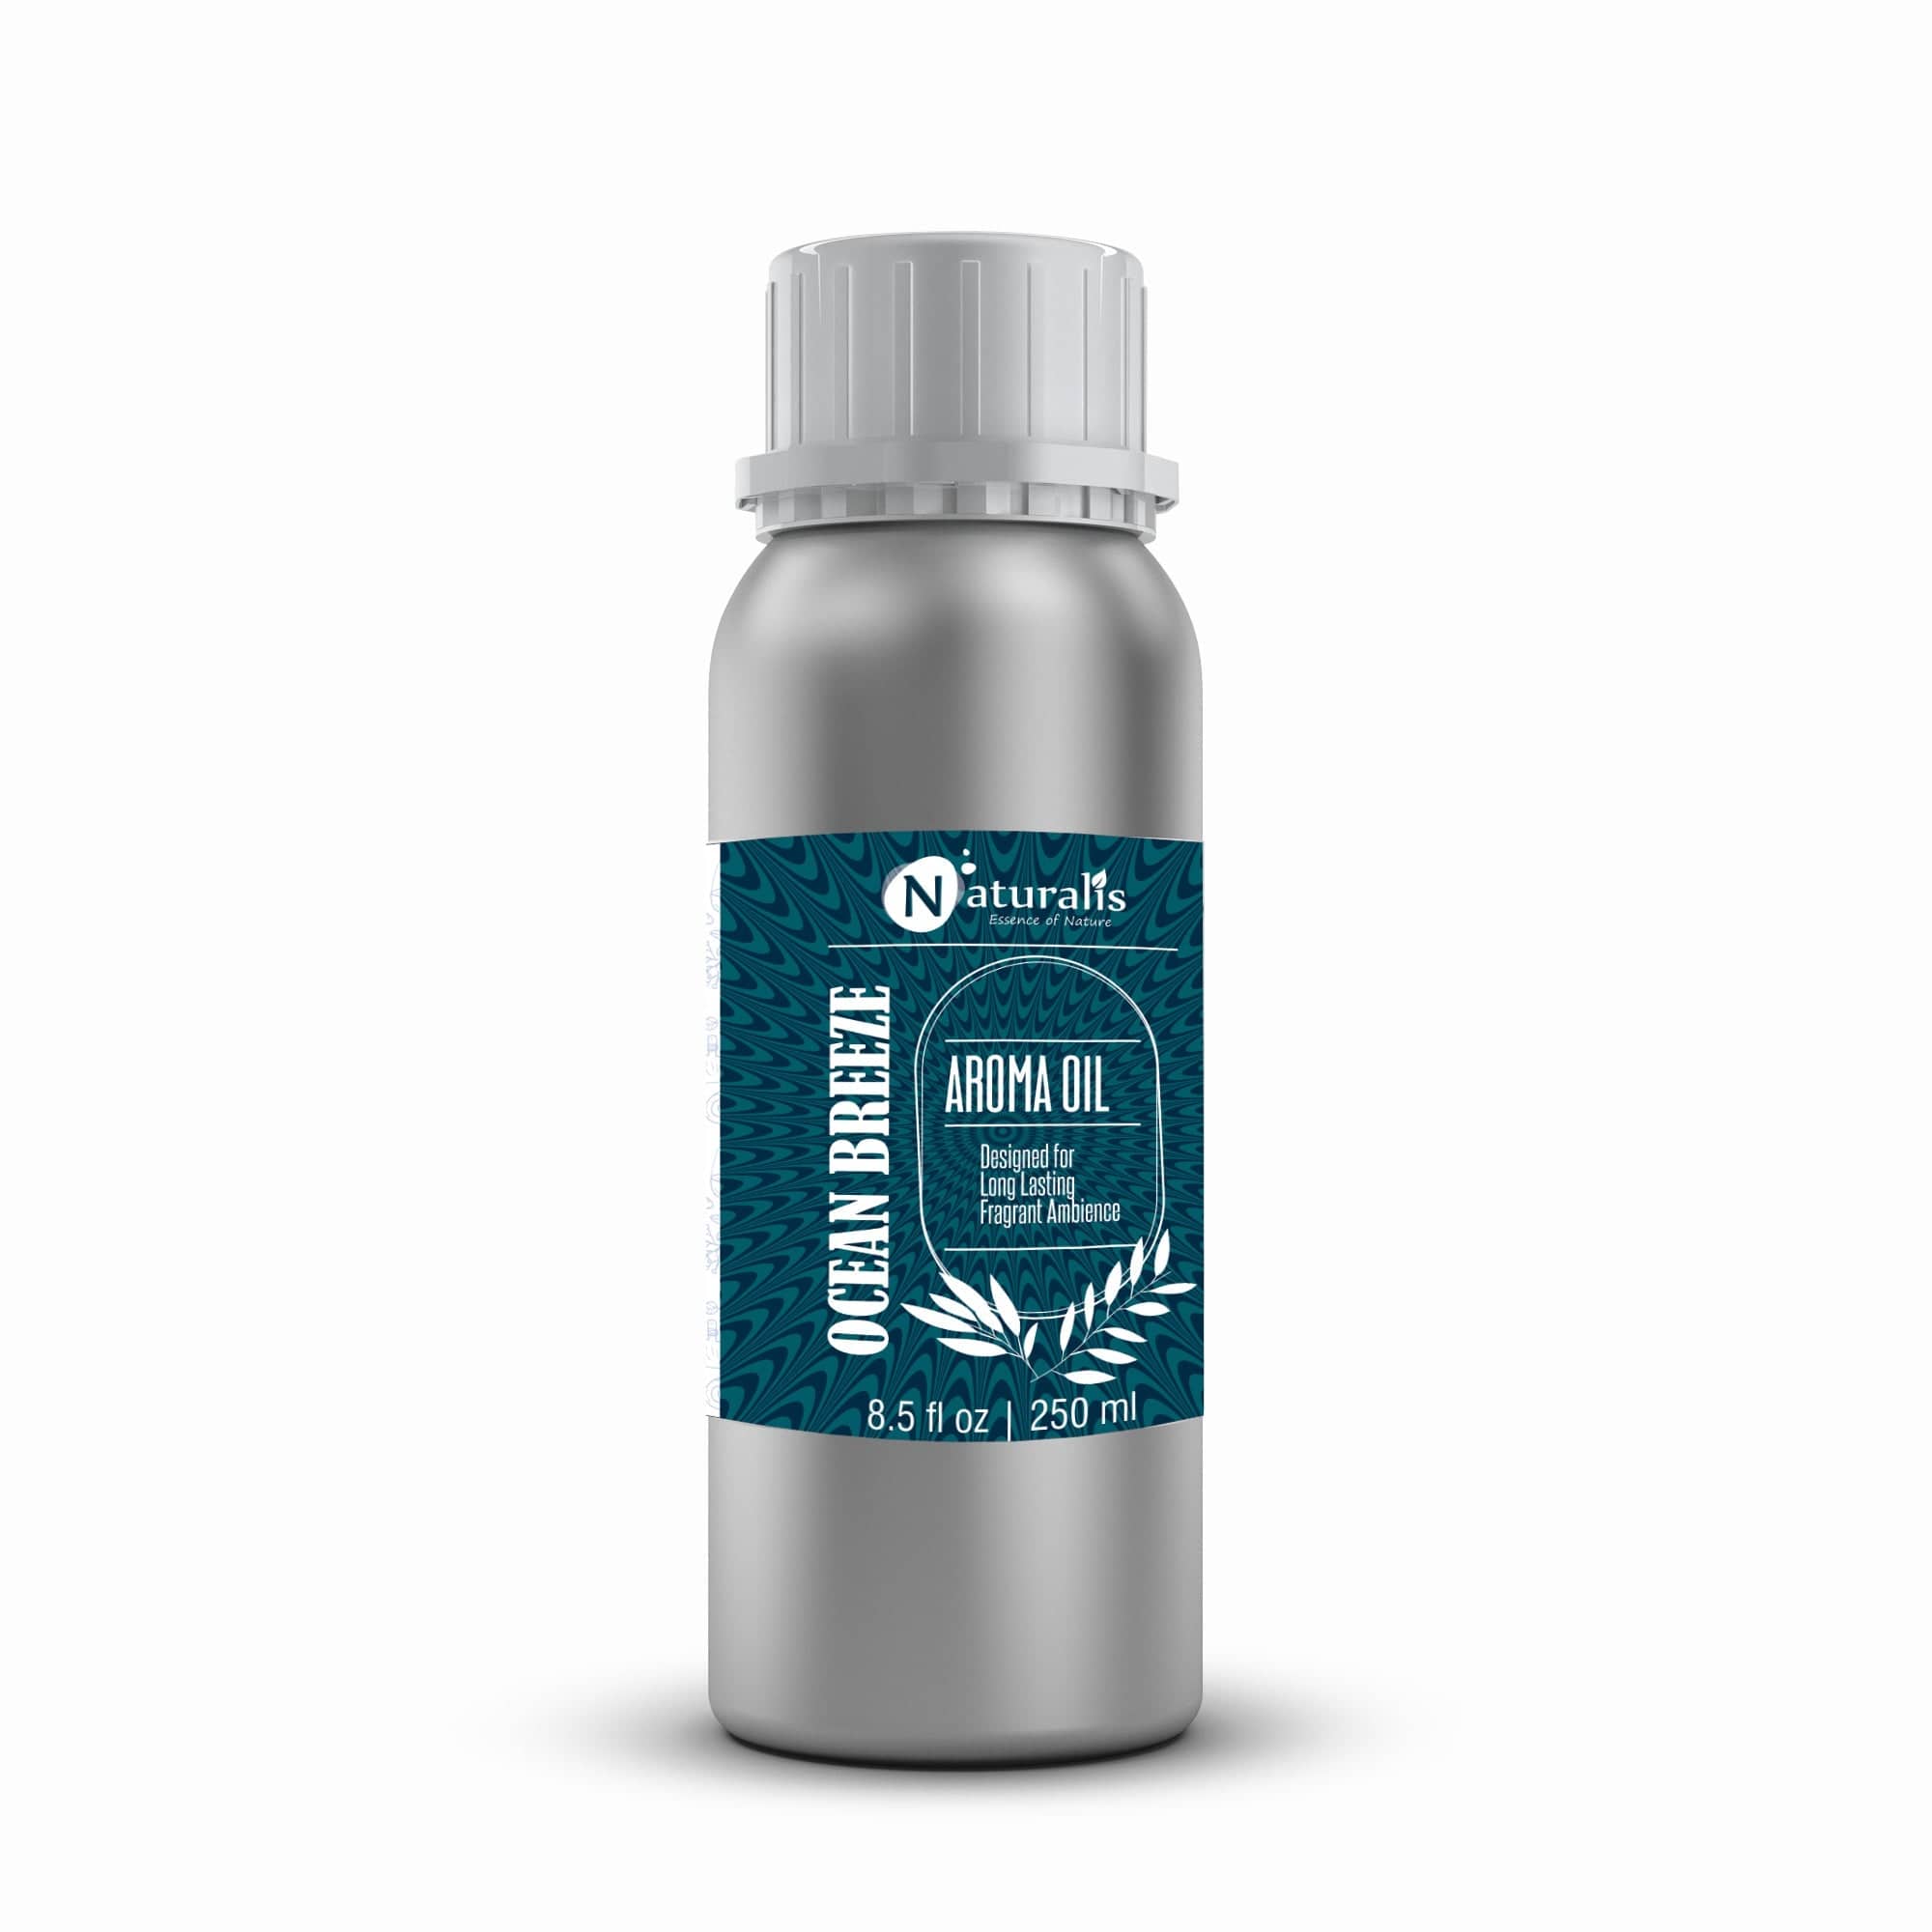 Naturalis Diffuser Oil For Ultrasonic Diffuser And Candle